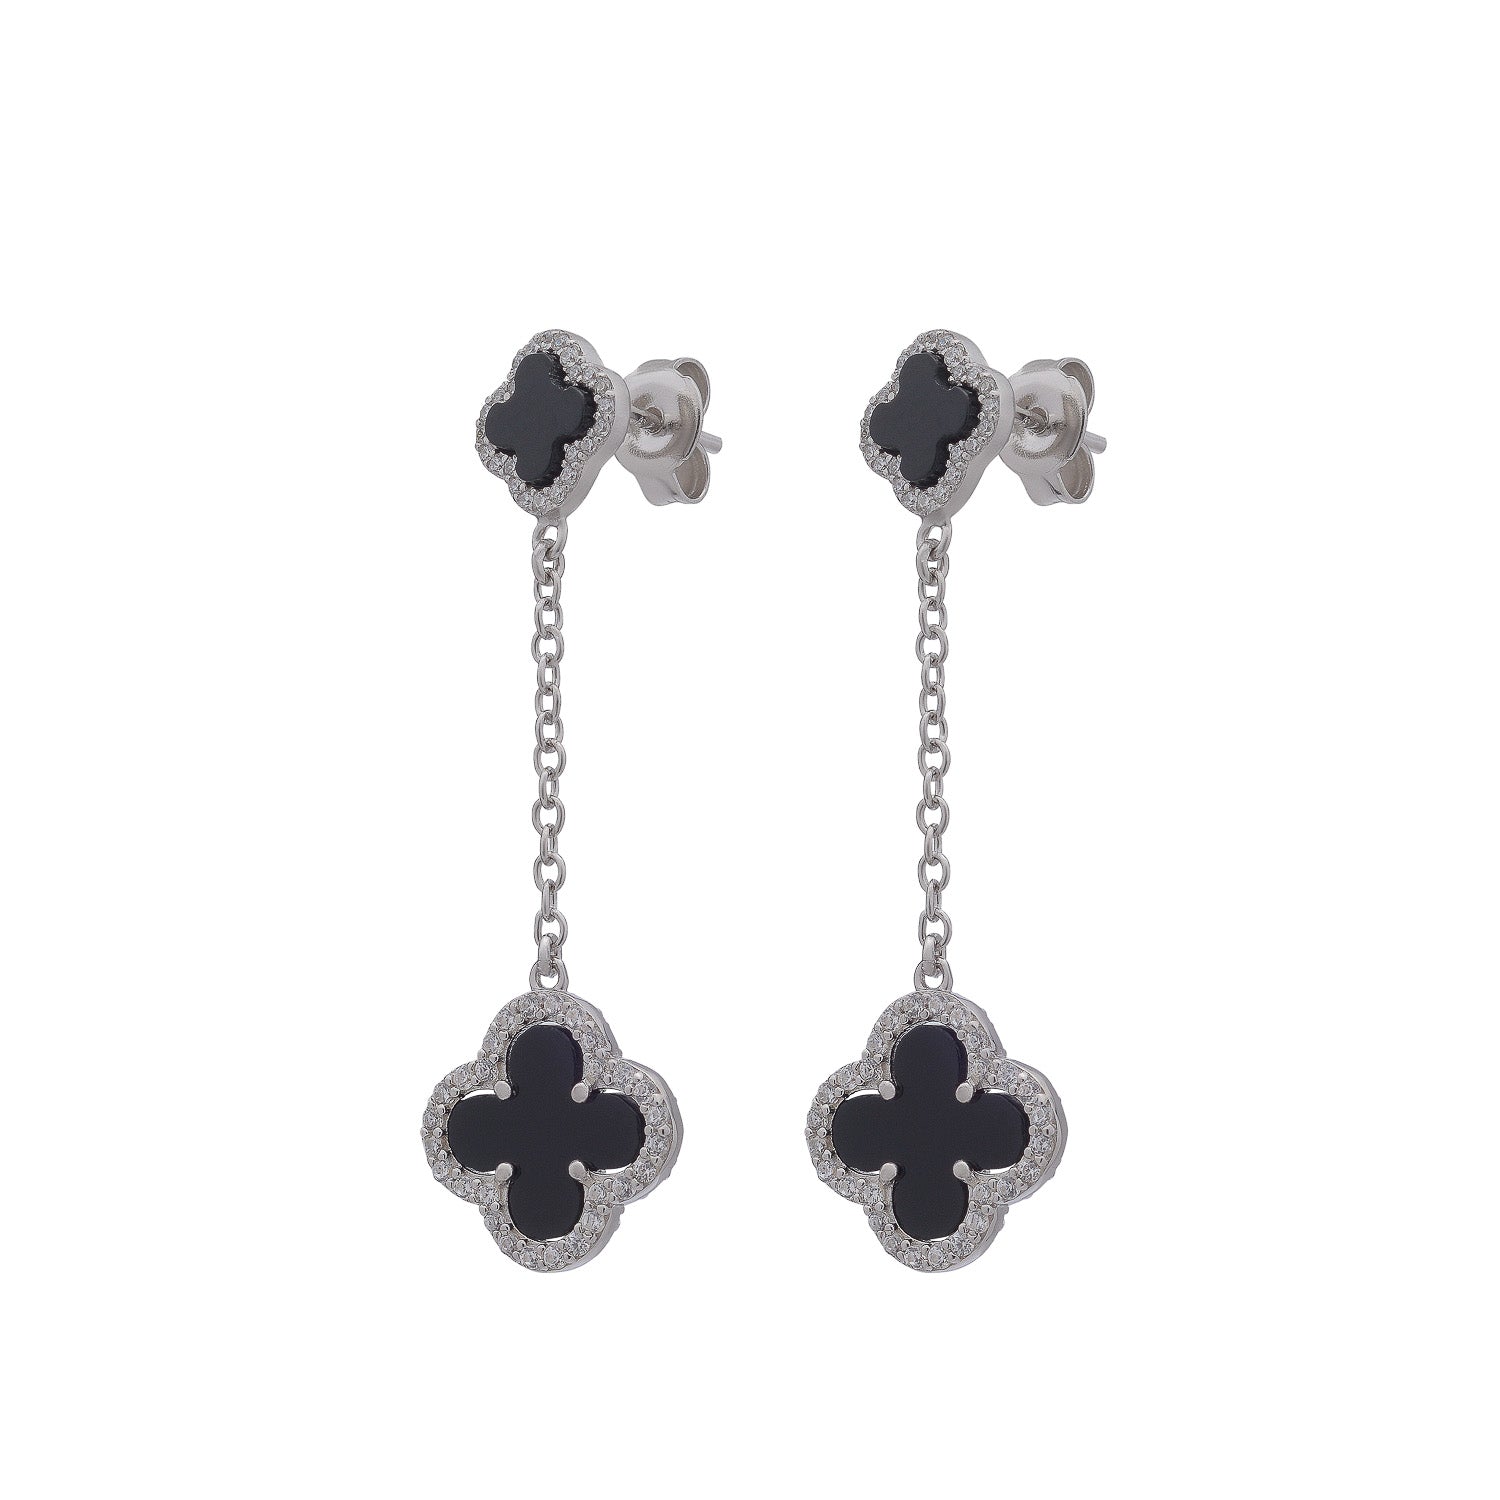 Clover Stud Drop Earrings with Black Onyx and Cubic Zirconia (Silver)